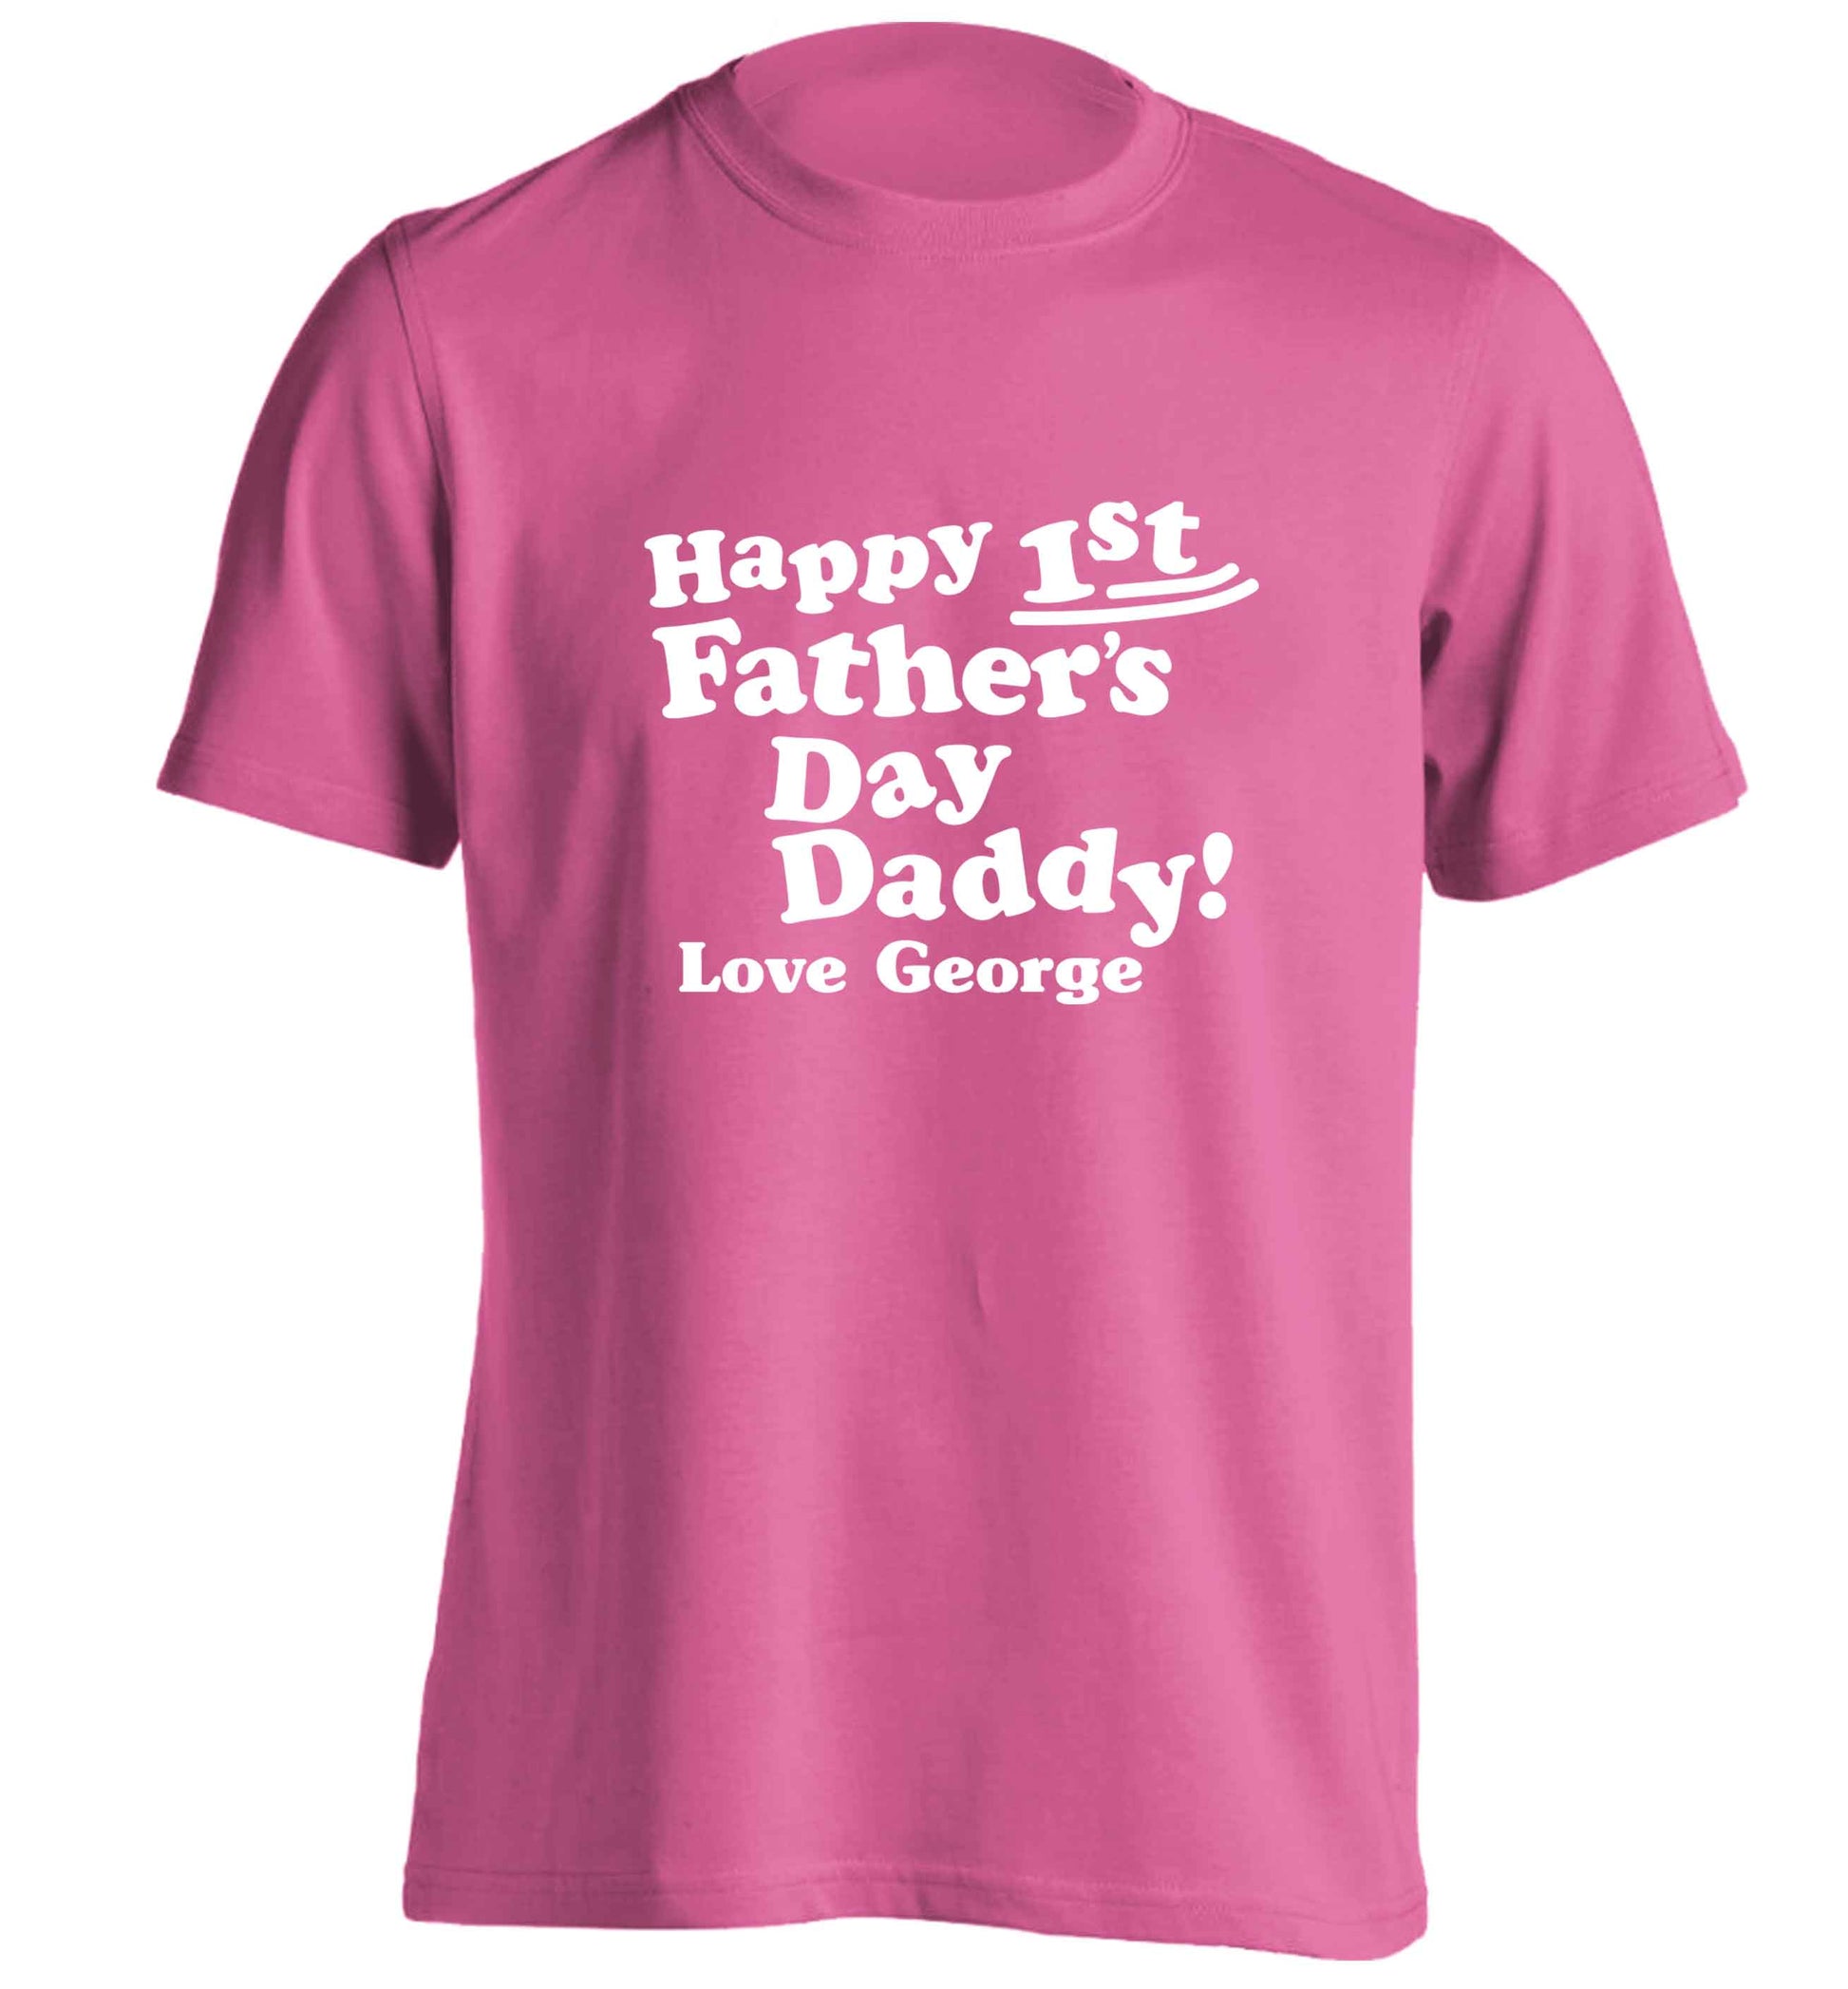 Happy first Fathers Day daddy love personalised adults unisex pink Tshirt 2XL